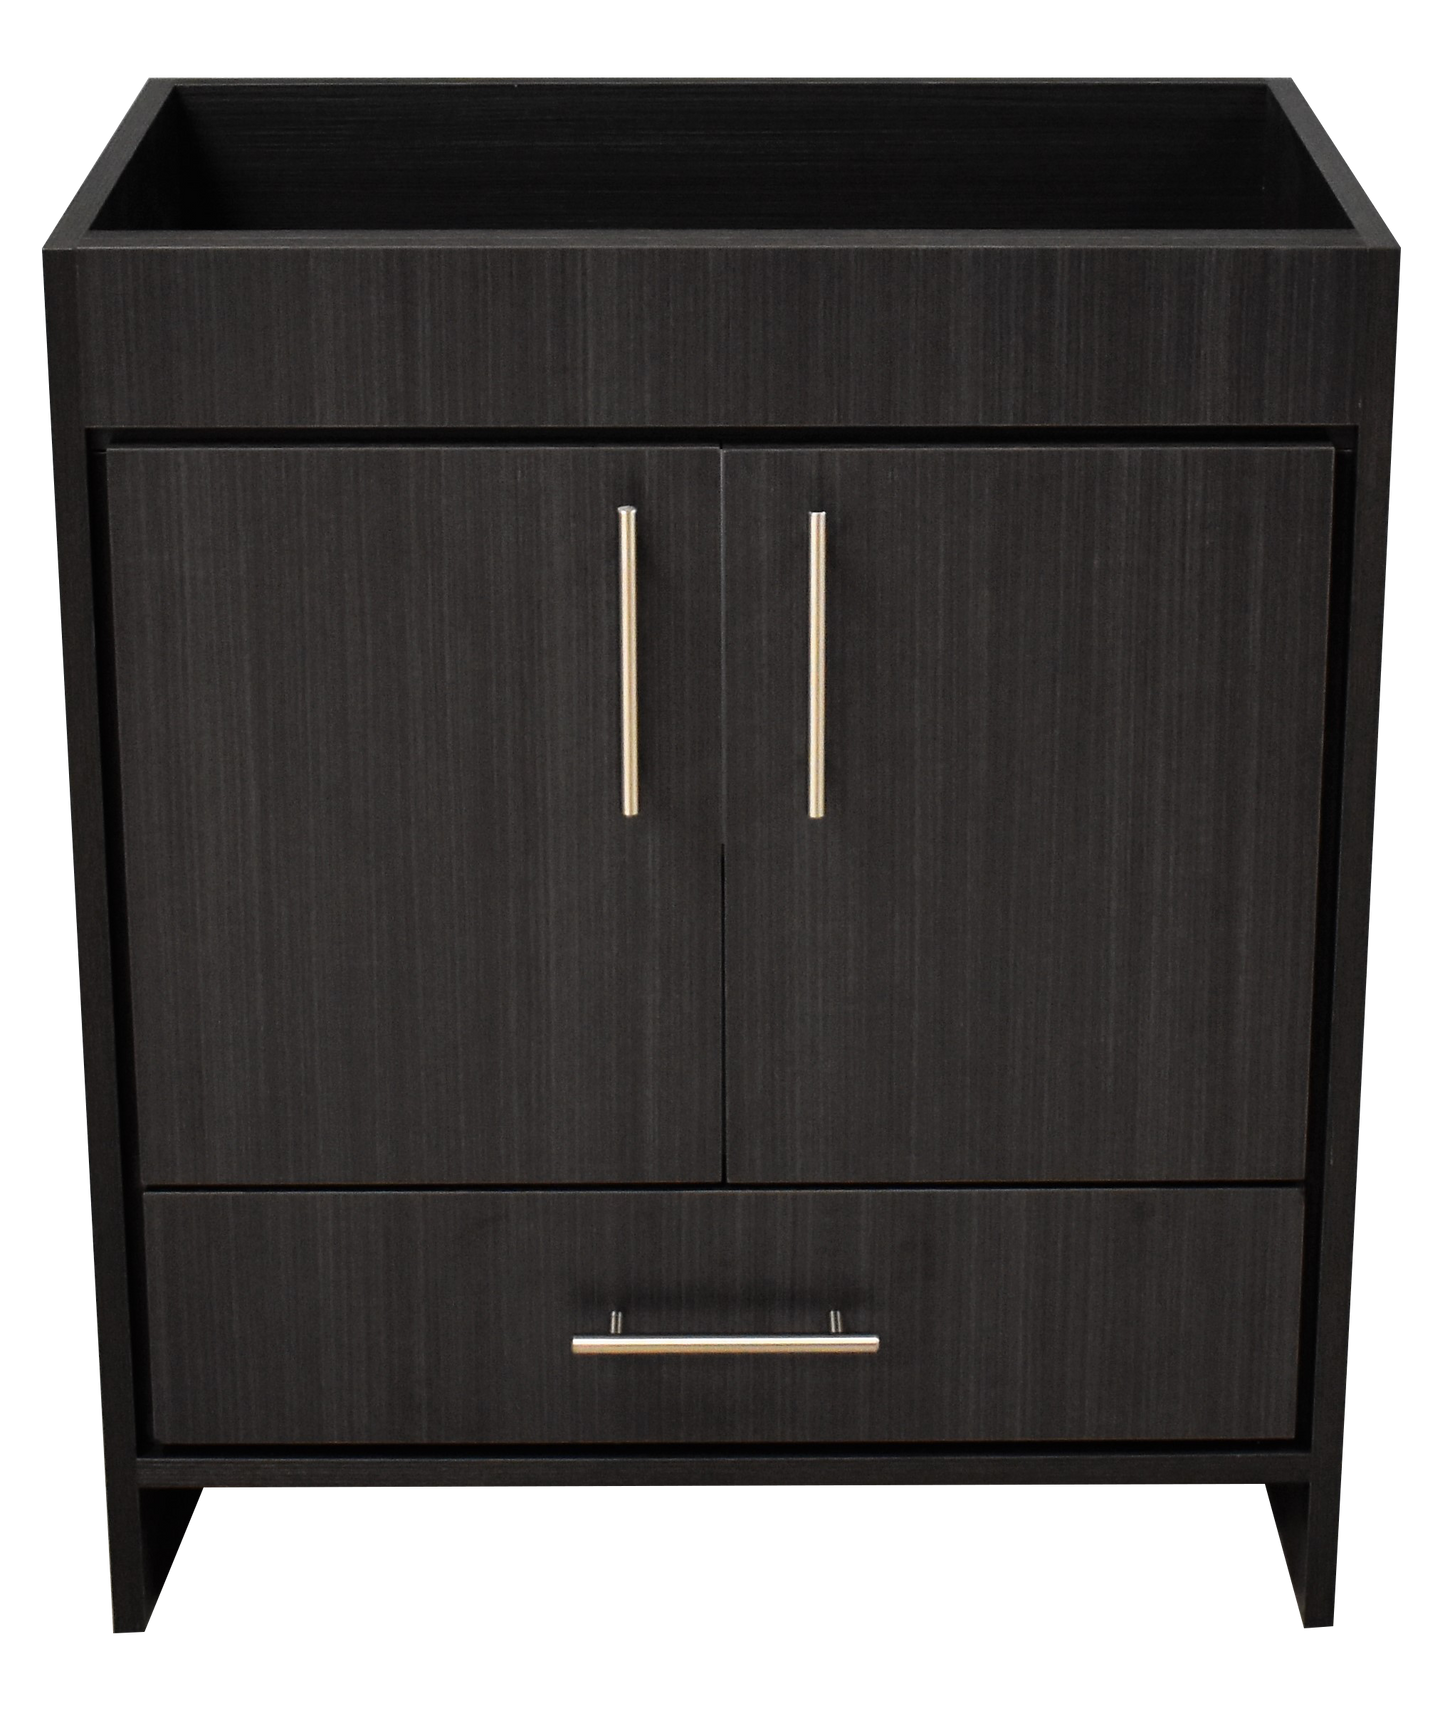 Volpa Rio 30" Modern Bathroom Vanity with Brushed Nickel Round Handles Cabinet Only - Luxe Bathroom Vanities Luxury Bathroom Fixtures Bathroom Furniture